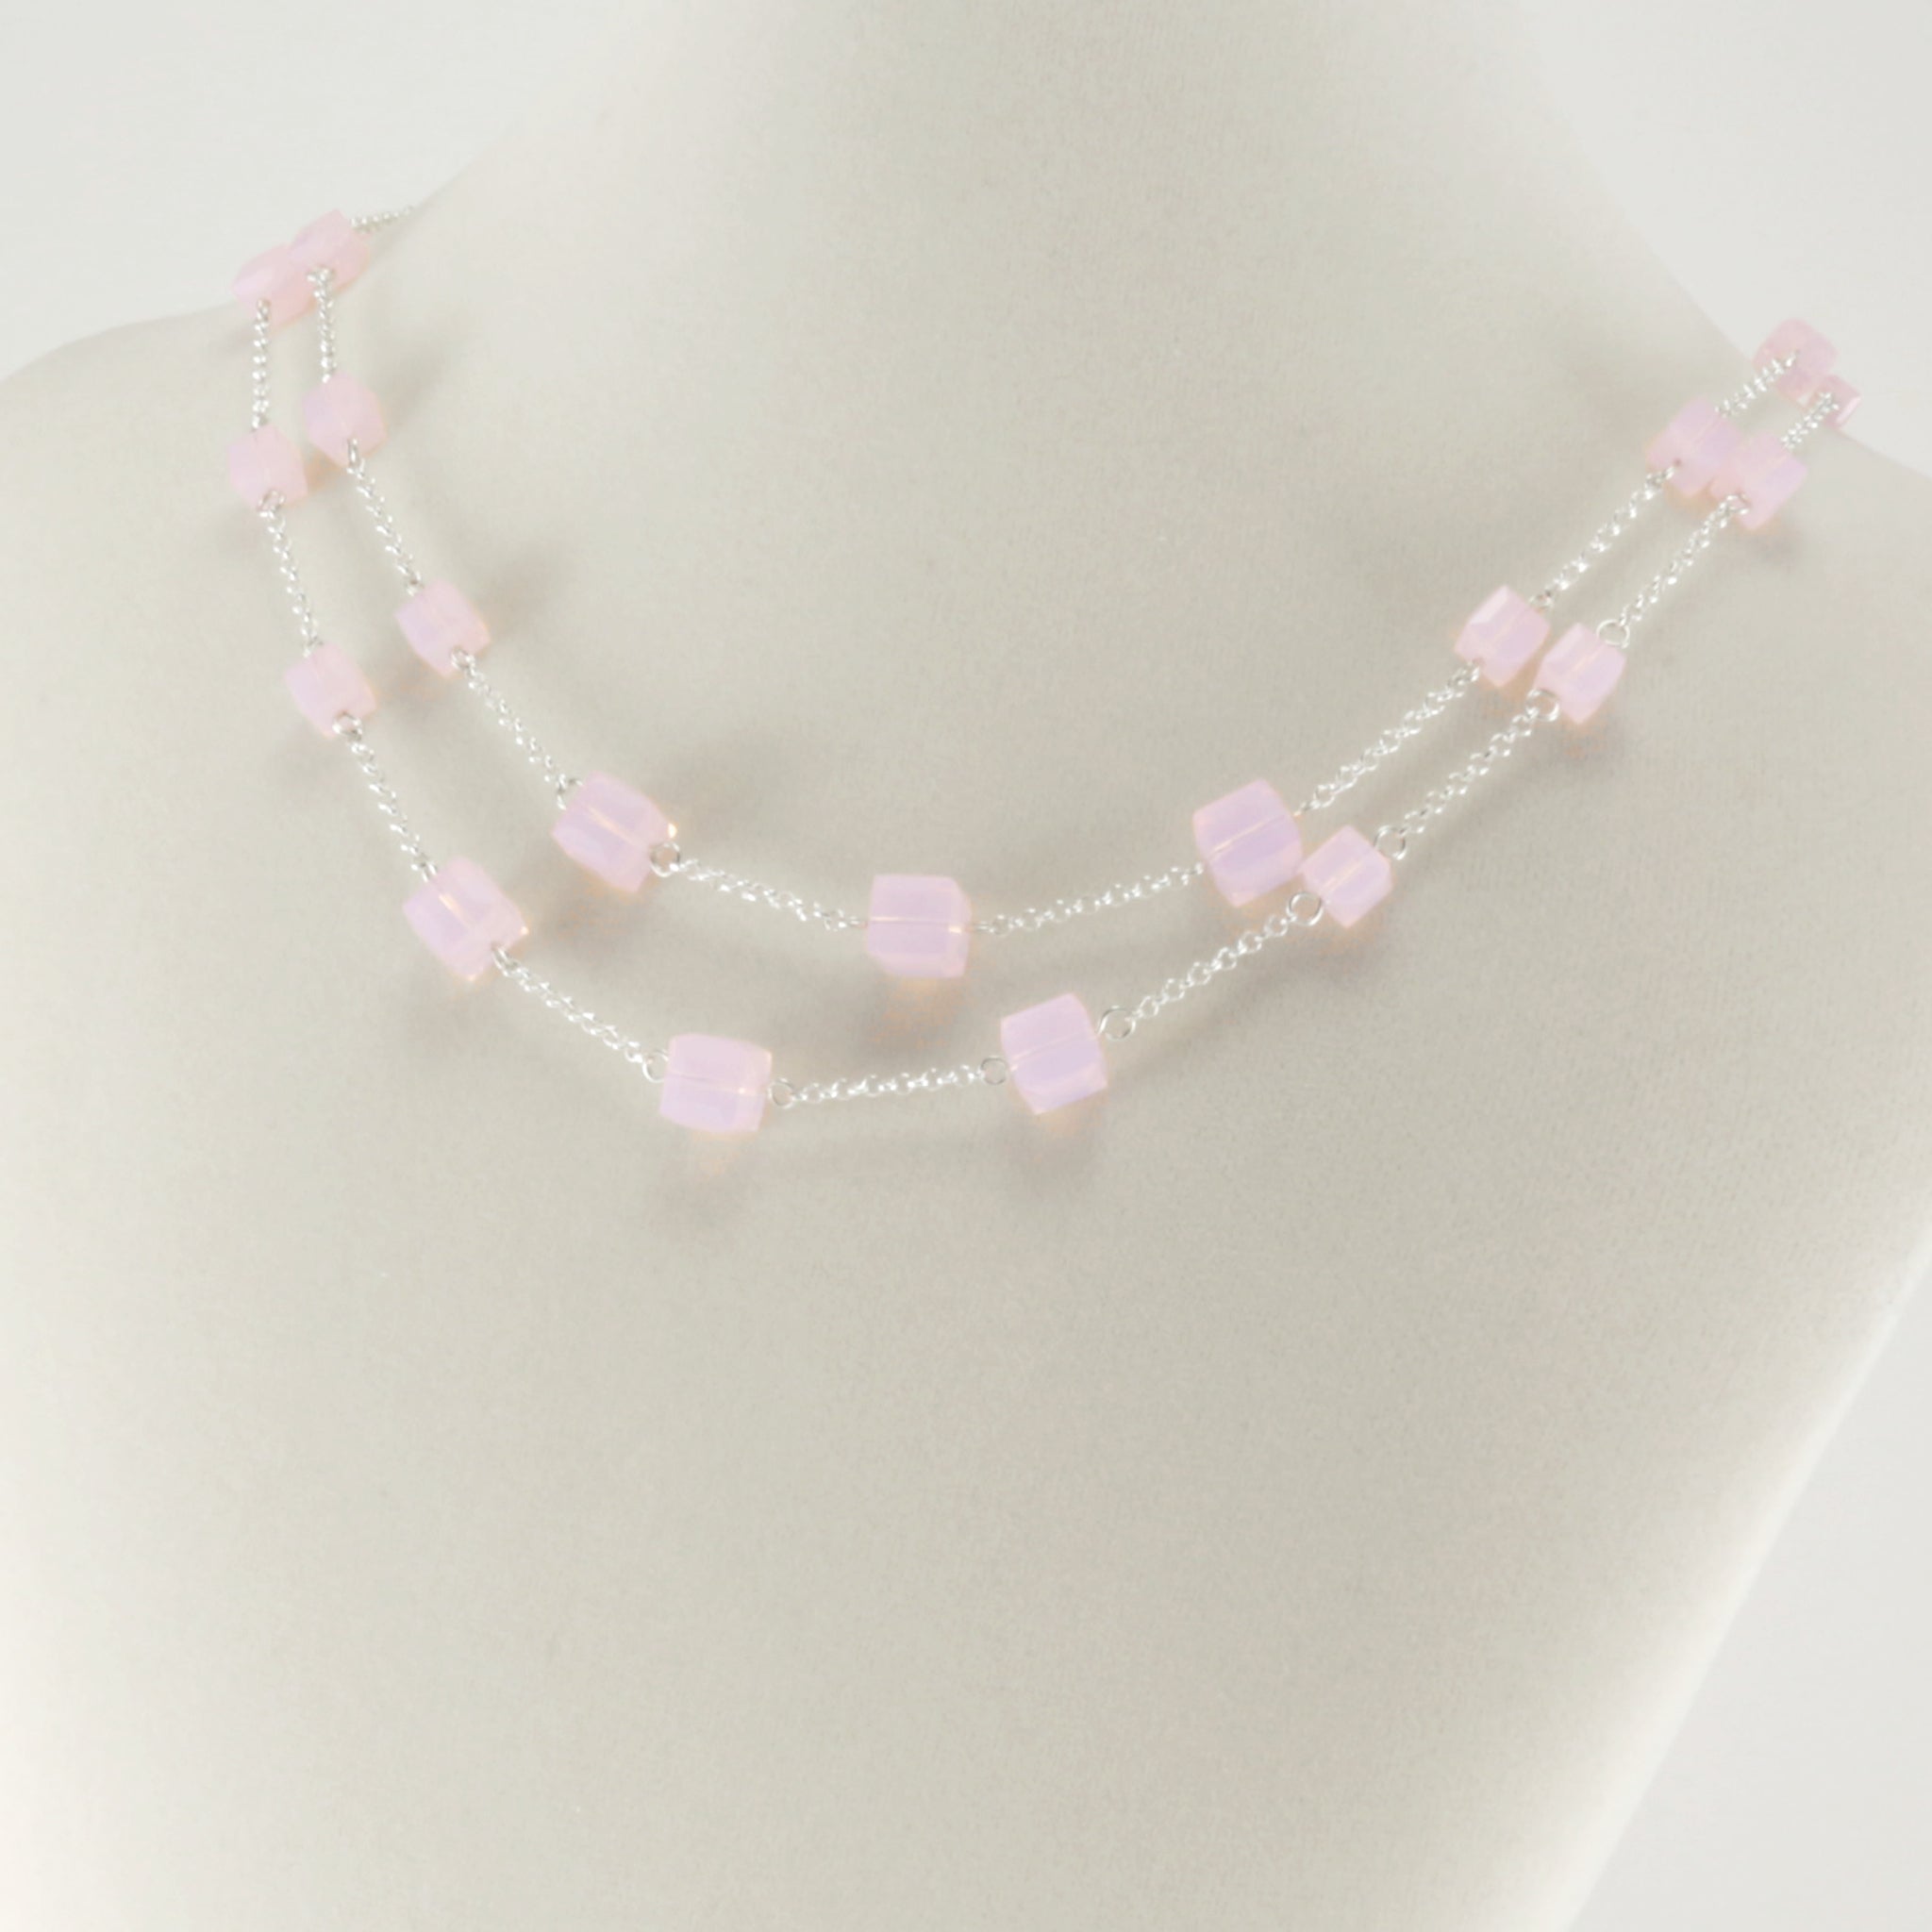 Windows Change-ABLE Necklace in Light Rose